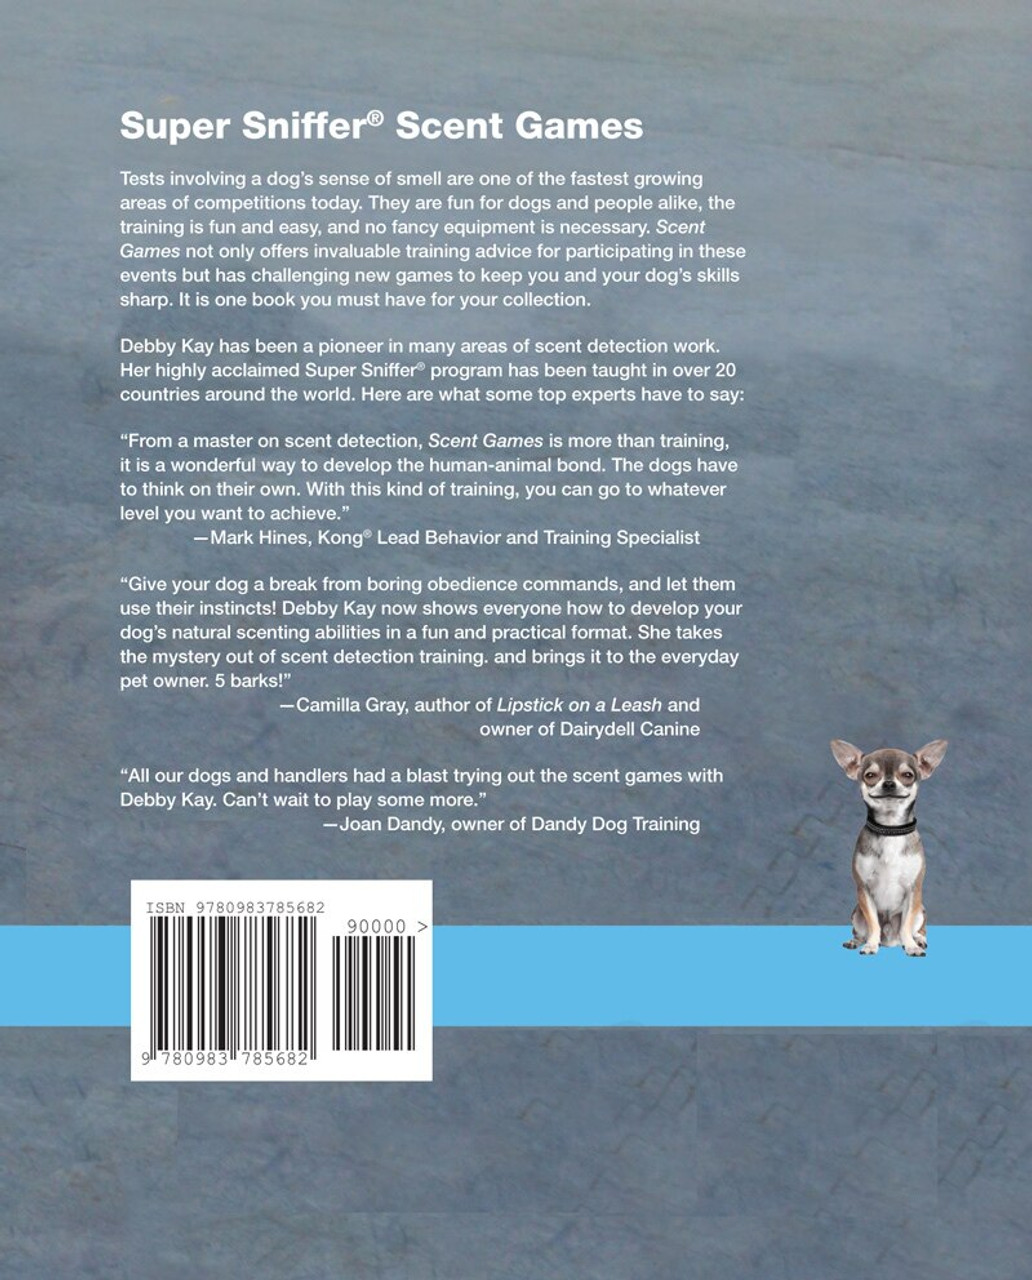 Sniff Scape and the Benefits of Indoor Scent Games for Dogs - Dog